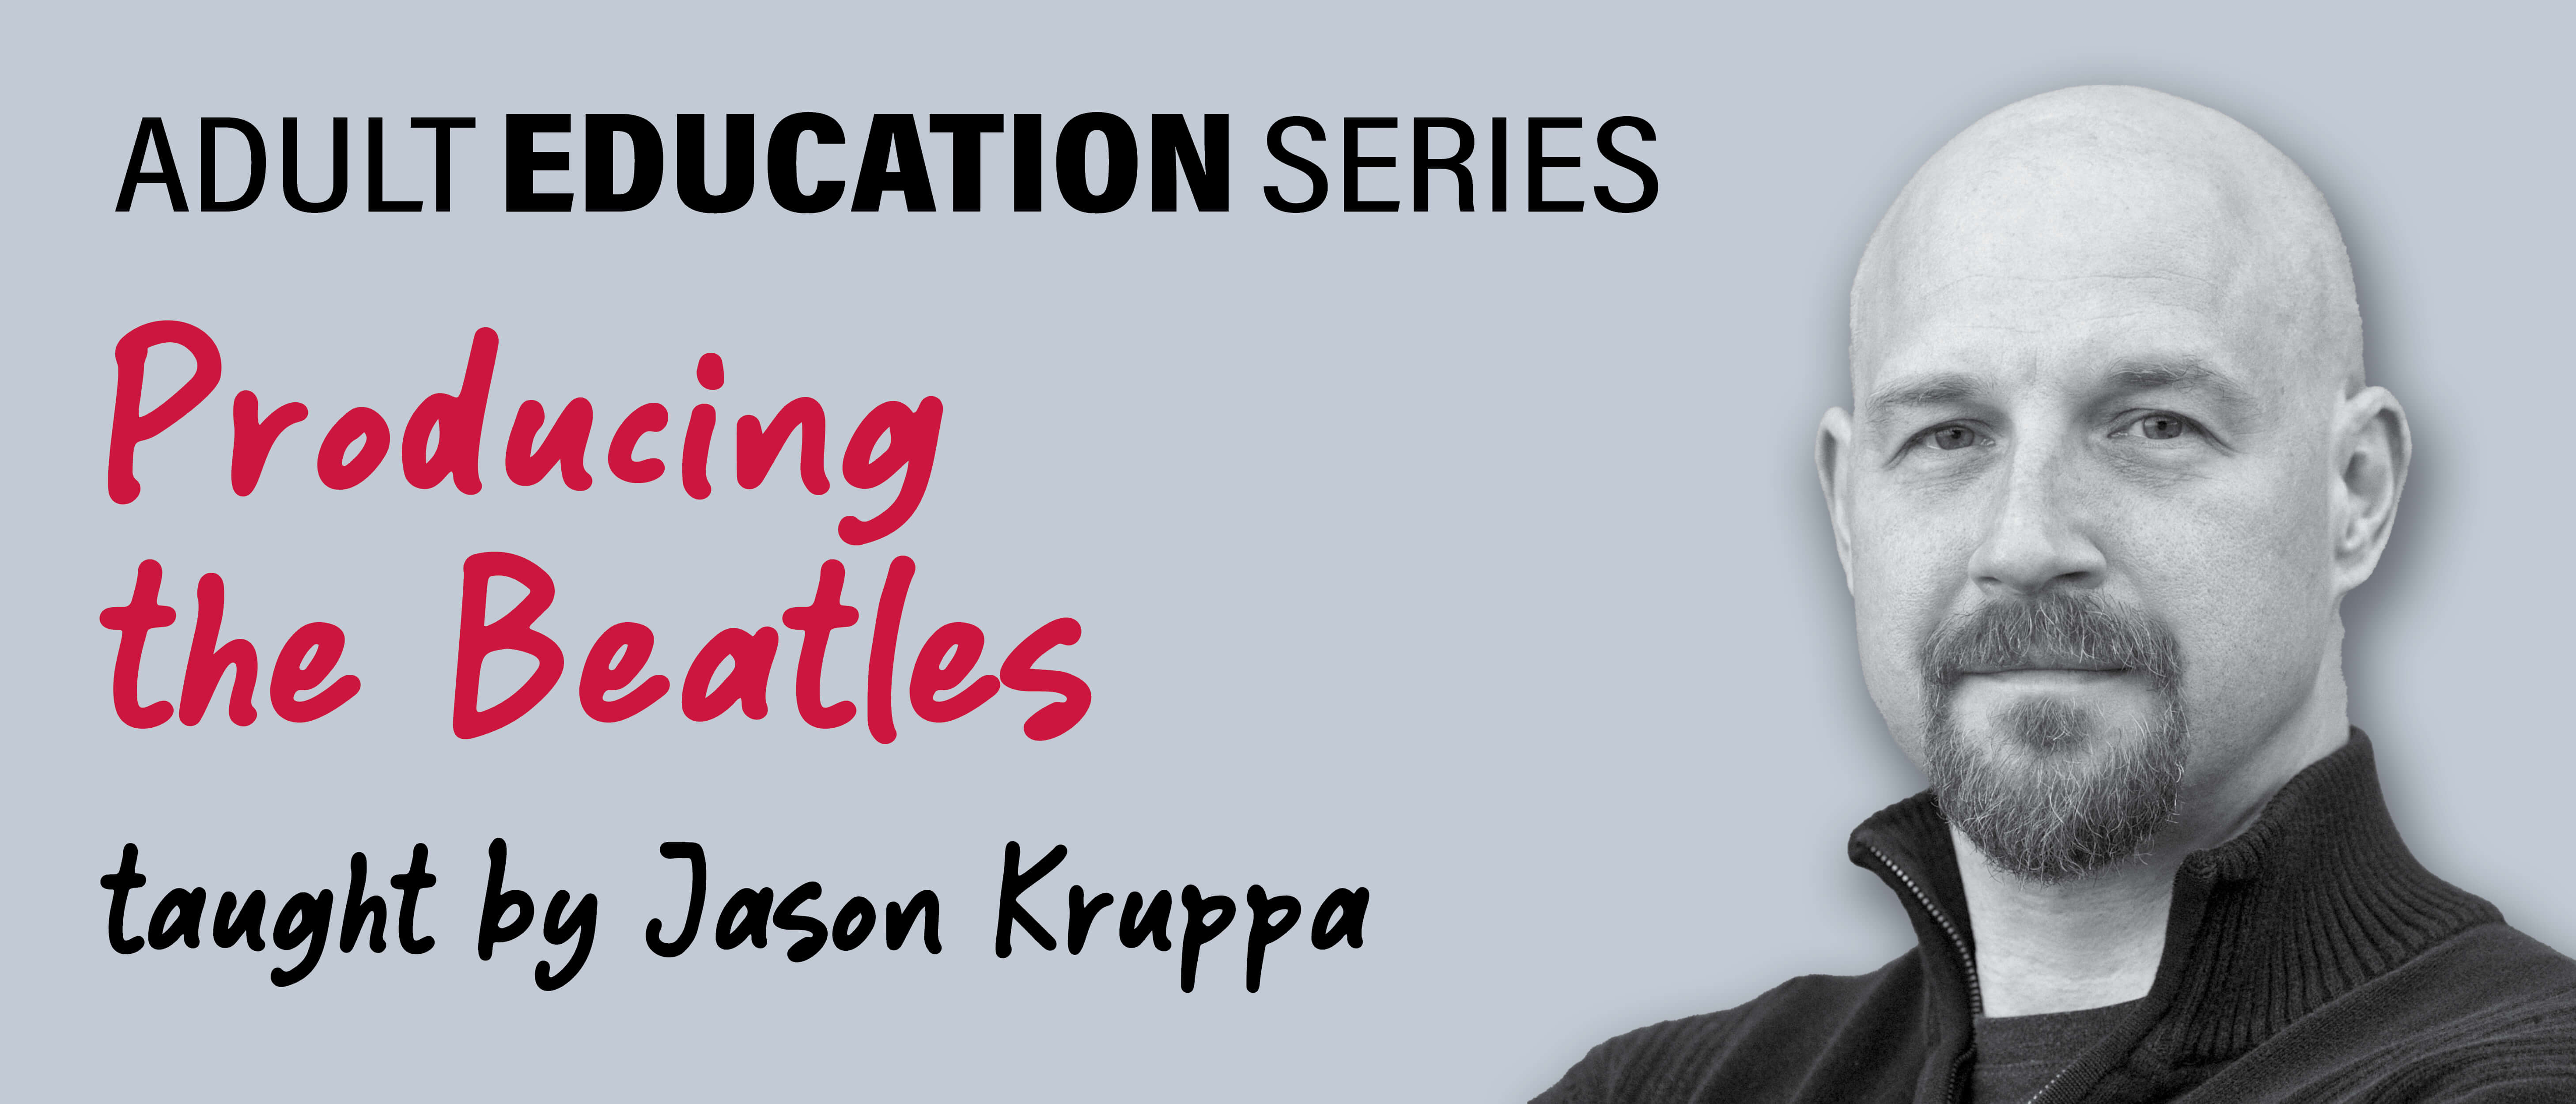 Adult Education Series: Producing the Beatles taught by Jason Kruppa